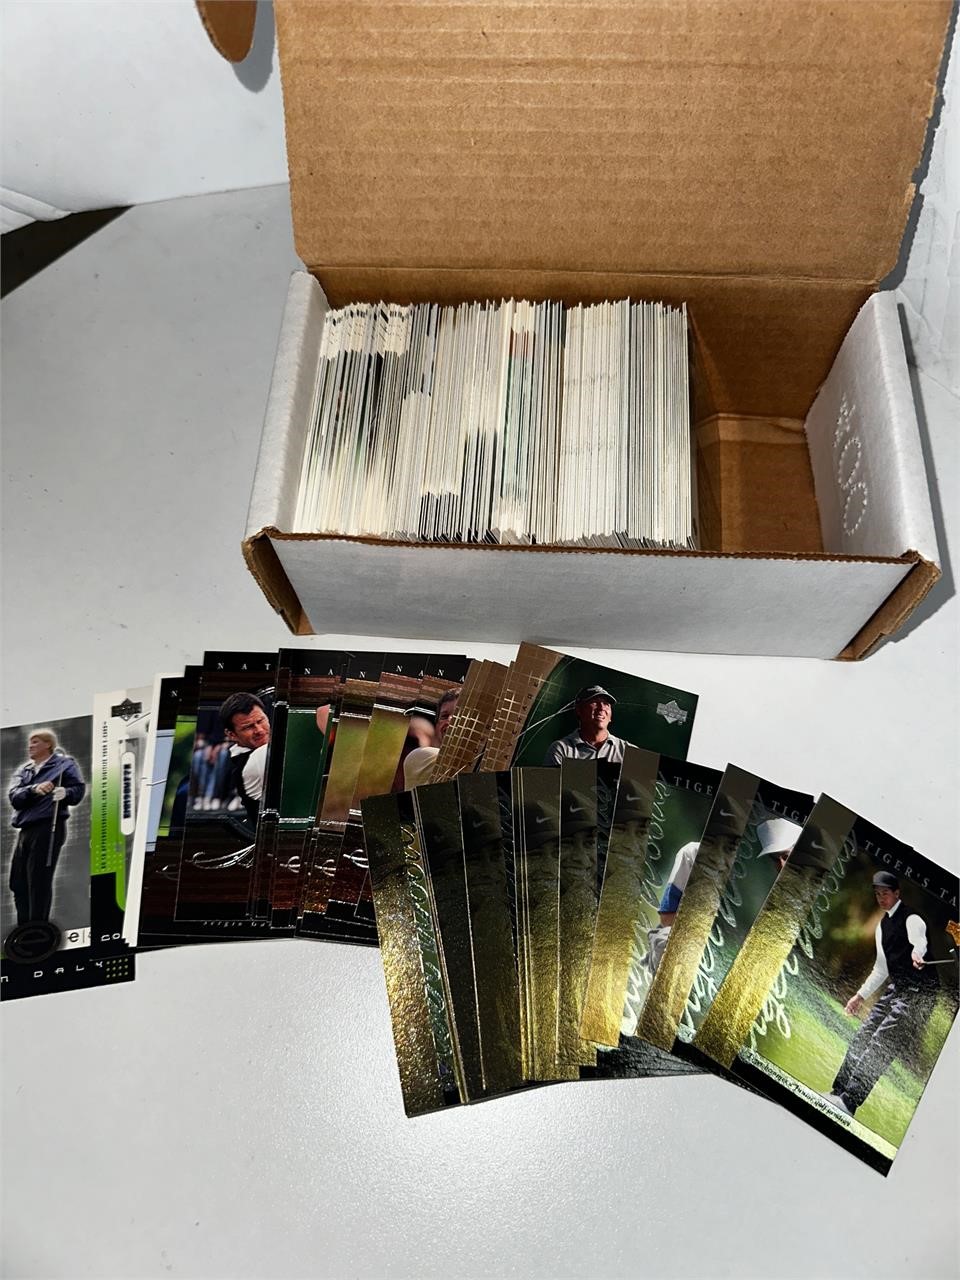 2001 golf cards with Tiger woods